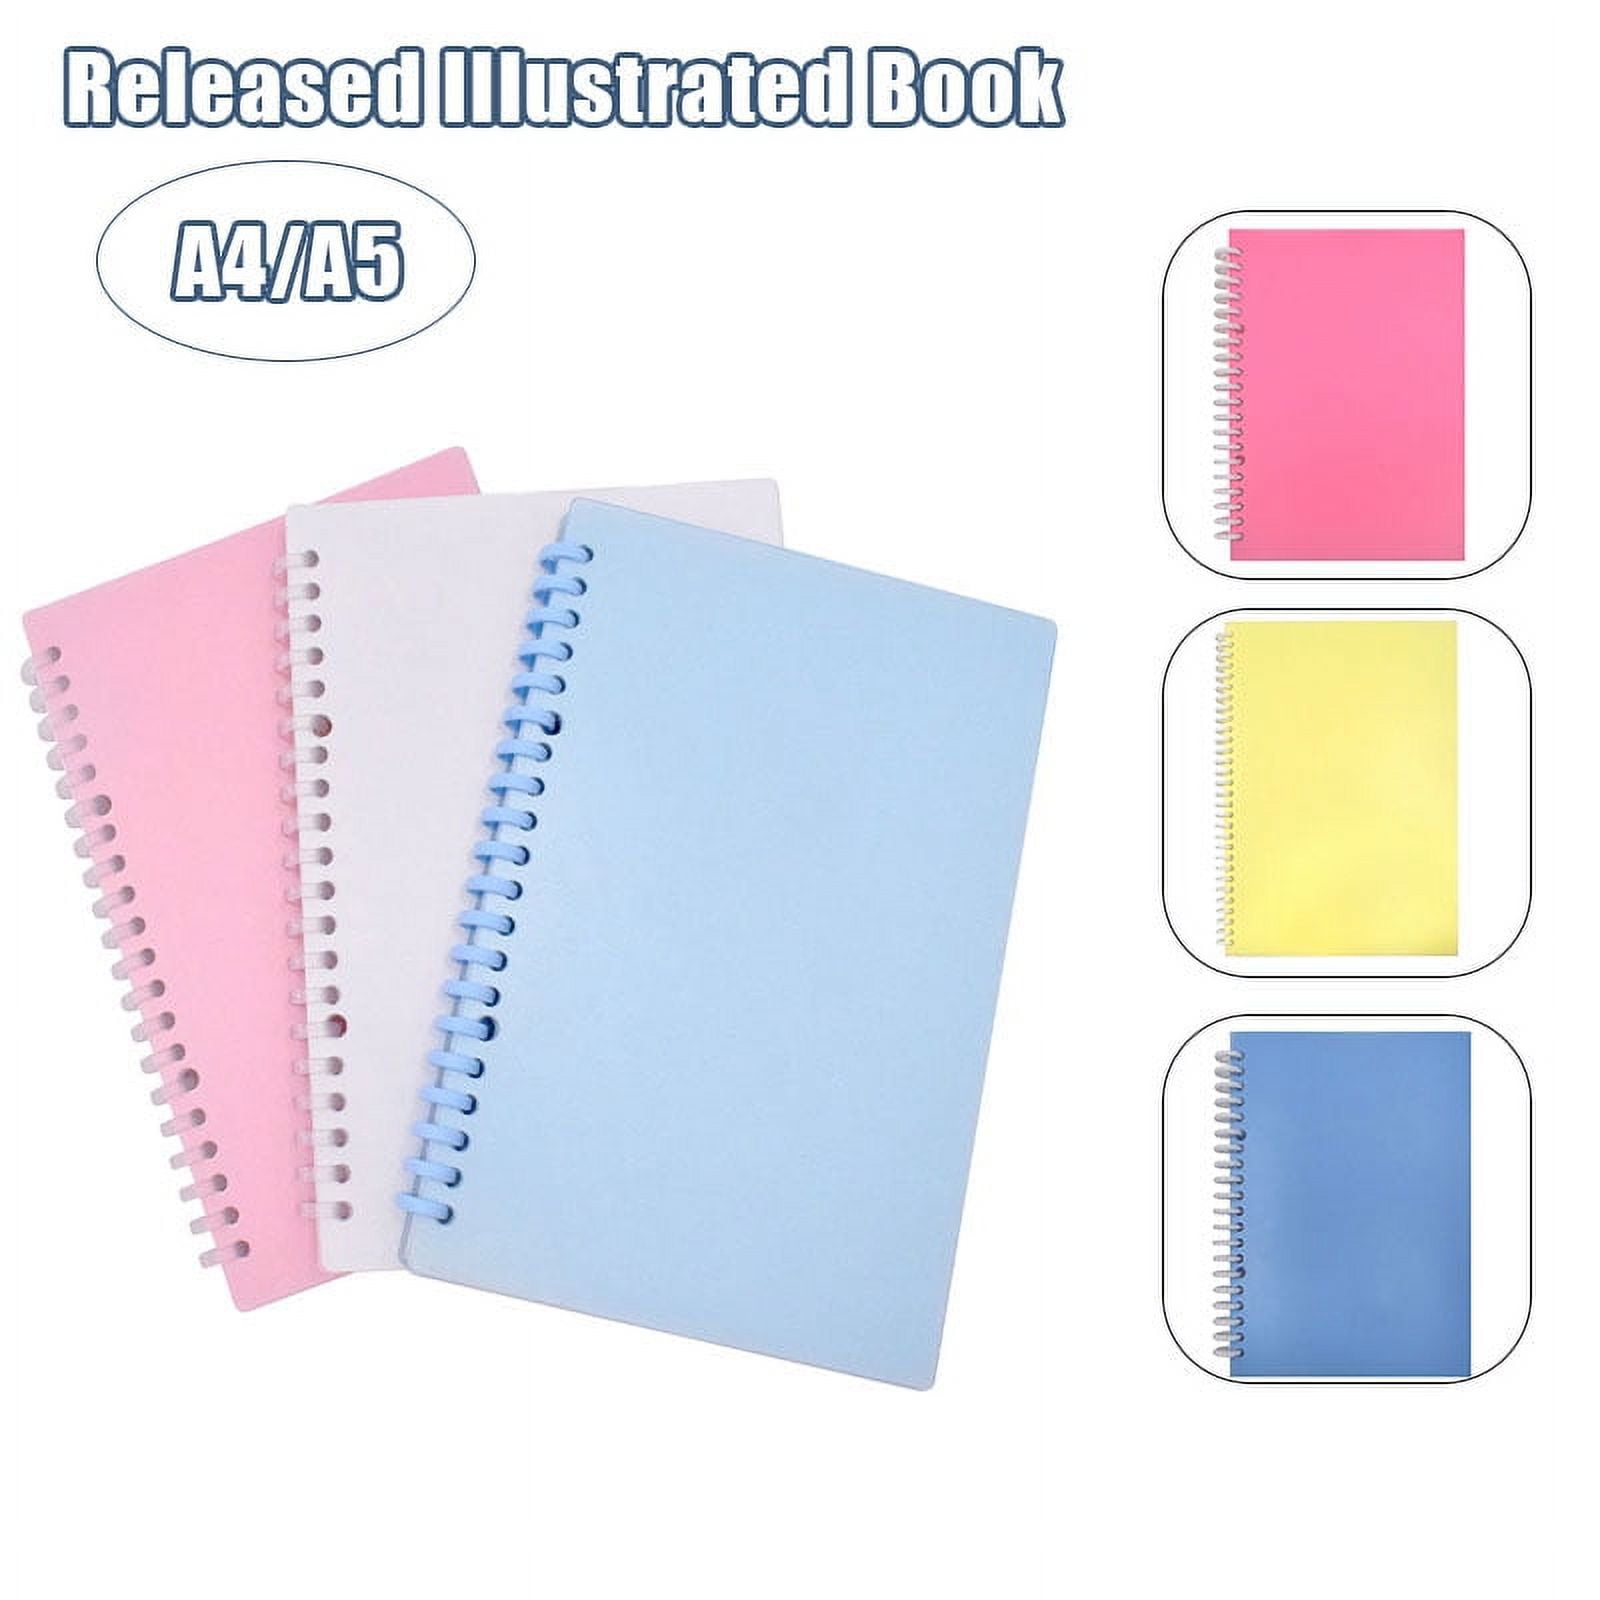 Sticker Collecting Album Reusable Sticker Book 40 Sheets 7.5 inch x 5 inch (PVC Transparent Shell (Metal Clip)) (A6)